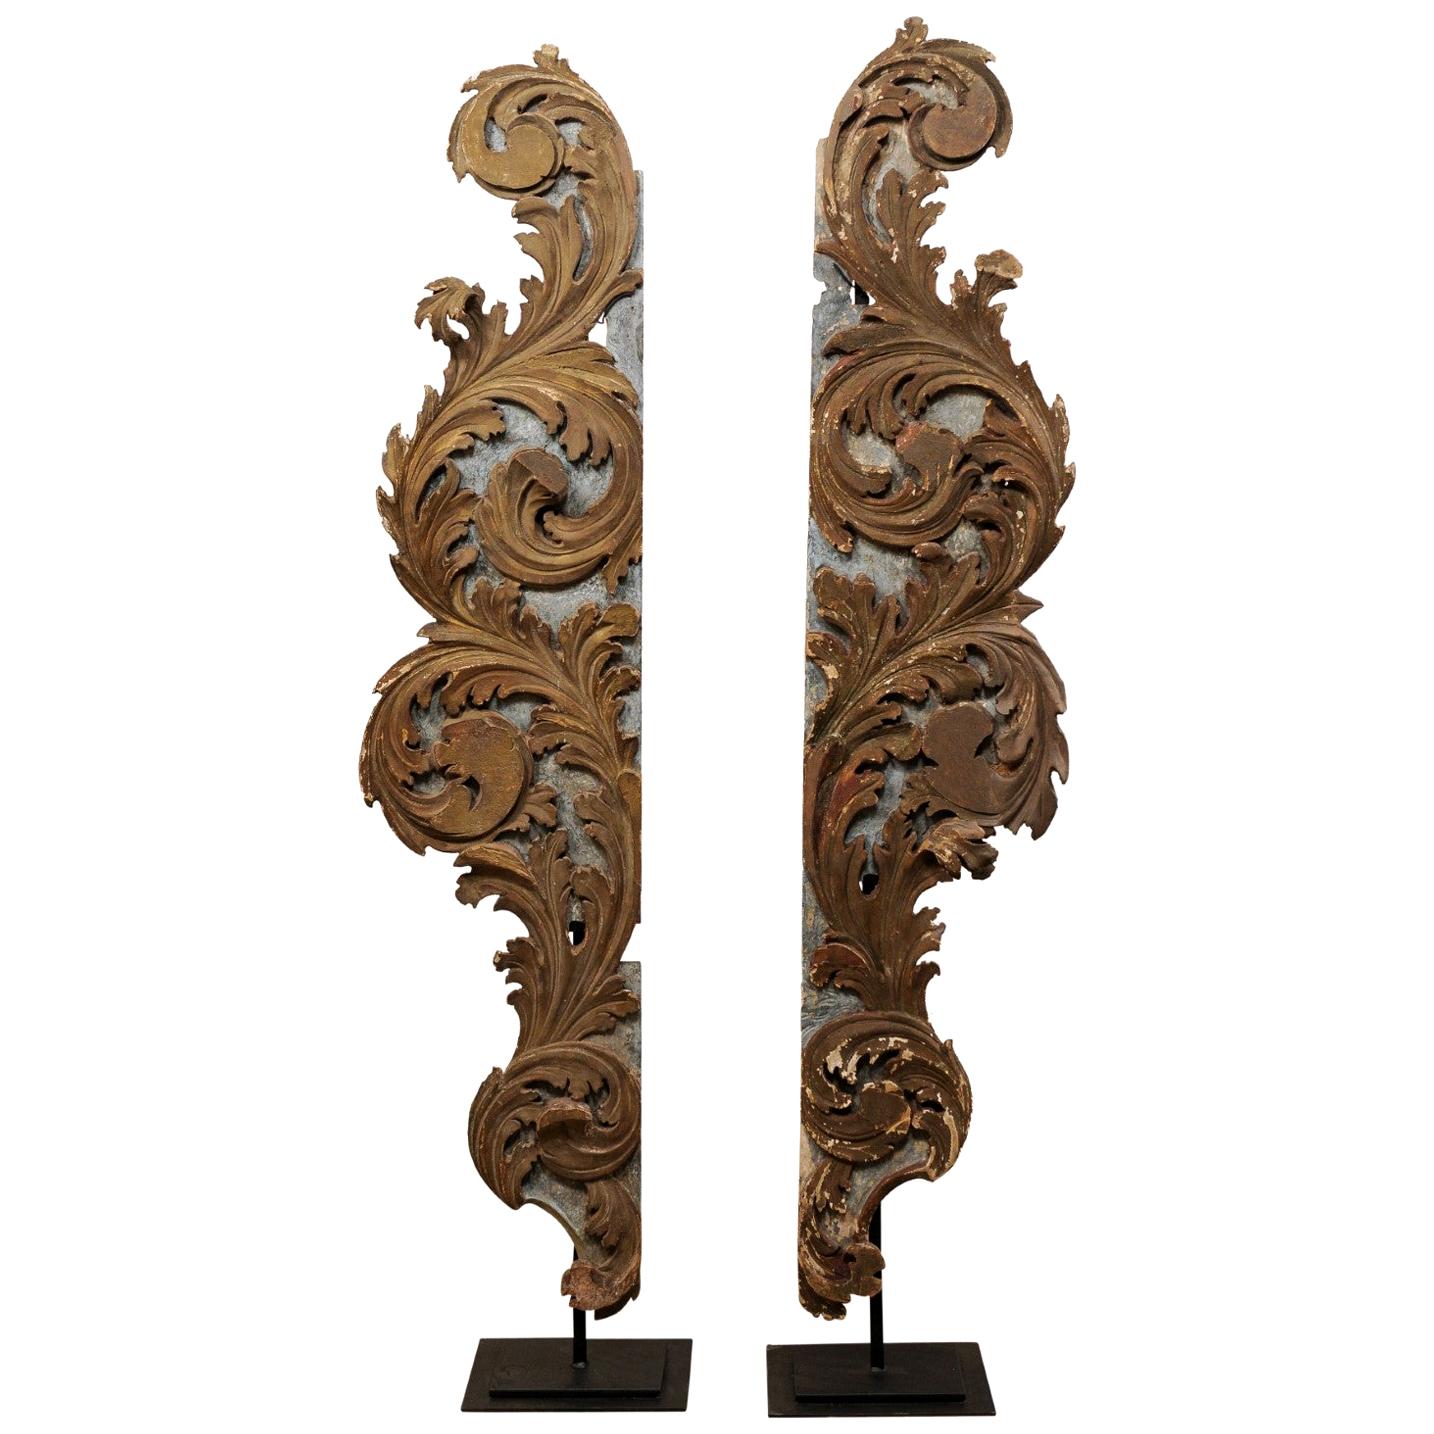 Pair of Italian Carved-Wood Architectural Acanthus Leaf Fragments